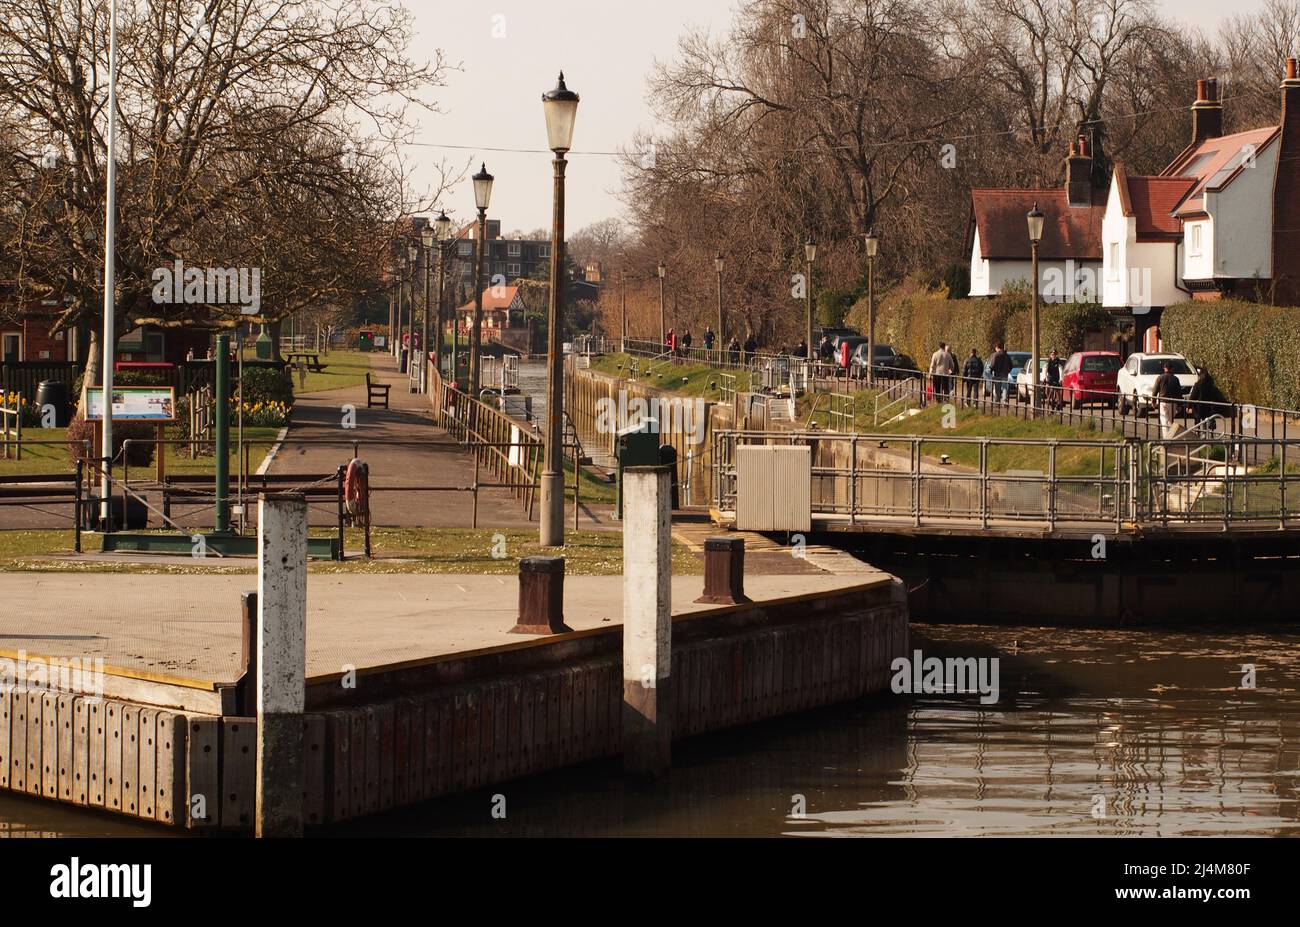 A view of Teddington Lock on the river Thames from the deck of a river cruise boat Stock Photo